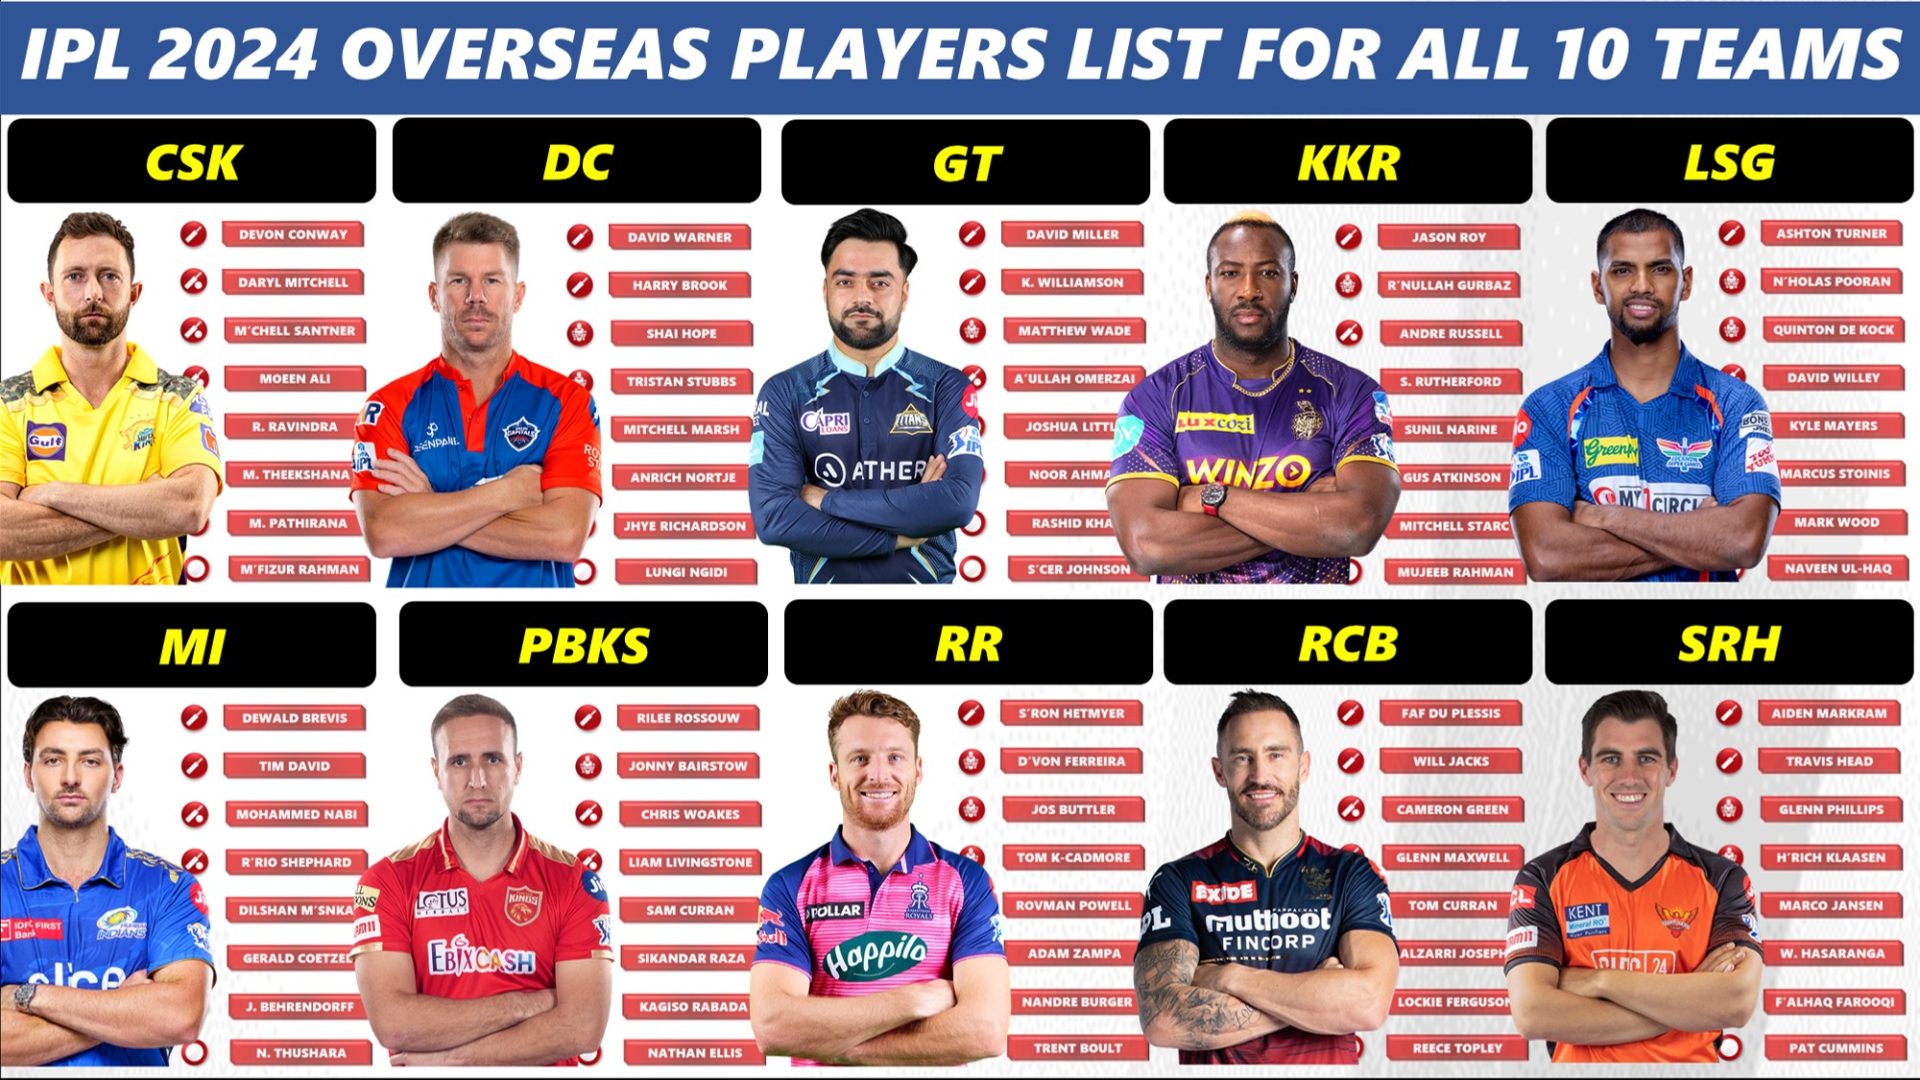 IPL 2024 Foreign Players Ranking for All 10 Teams